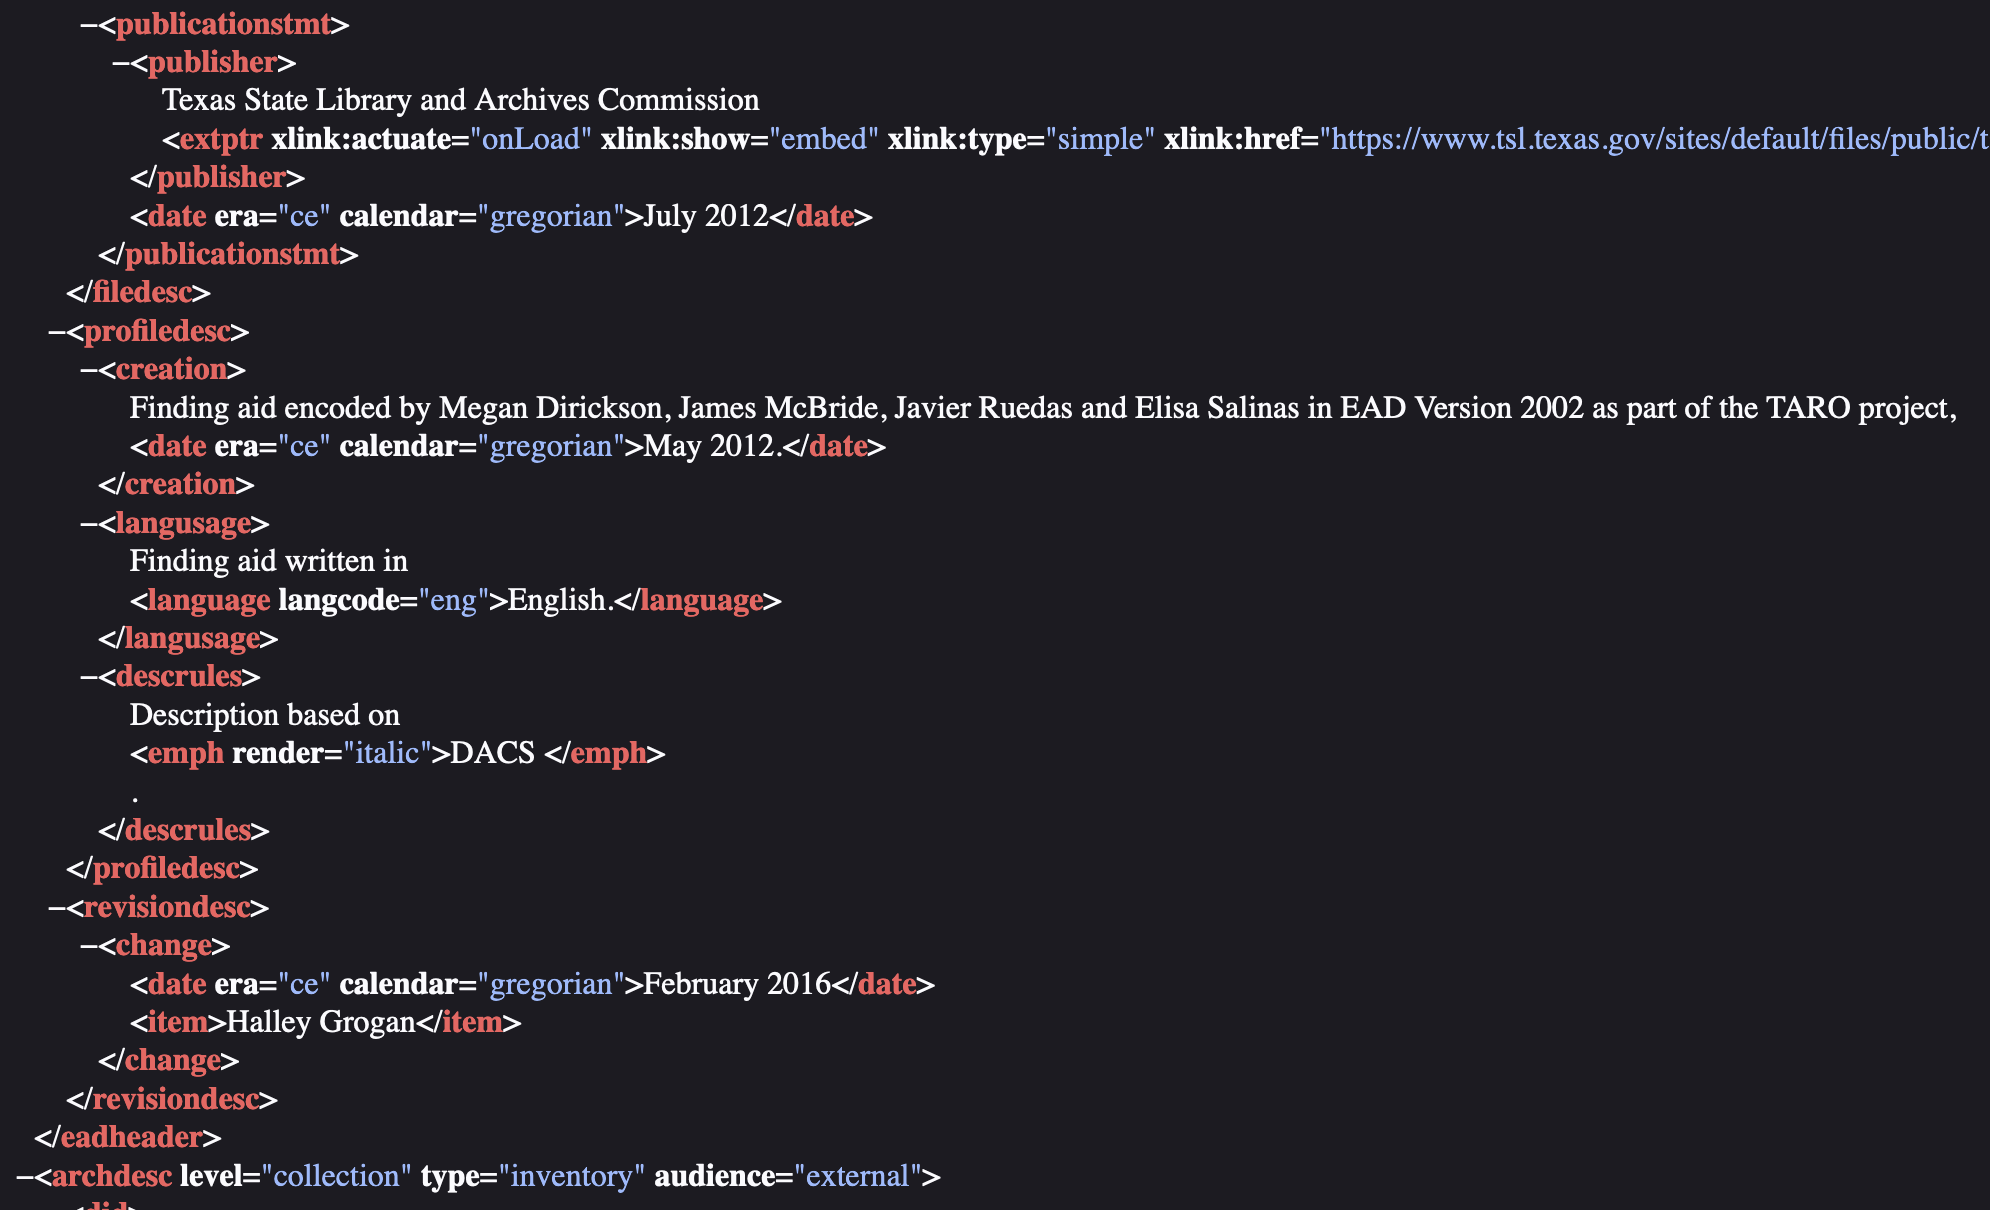 A snippet of XML code in EAD following DACS format, created by a team of four including Javier Ruedas in 2012.